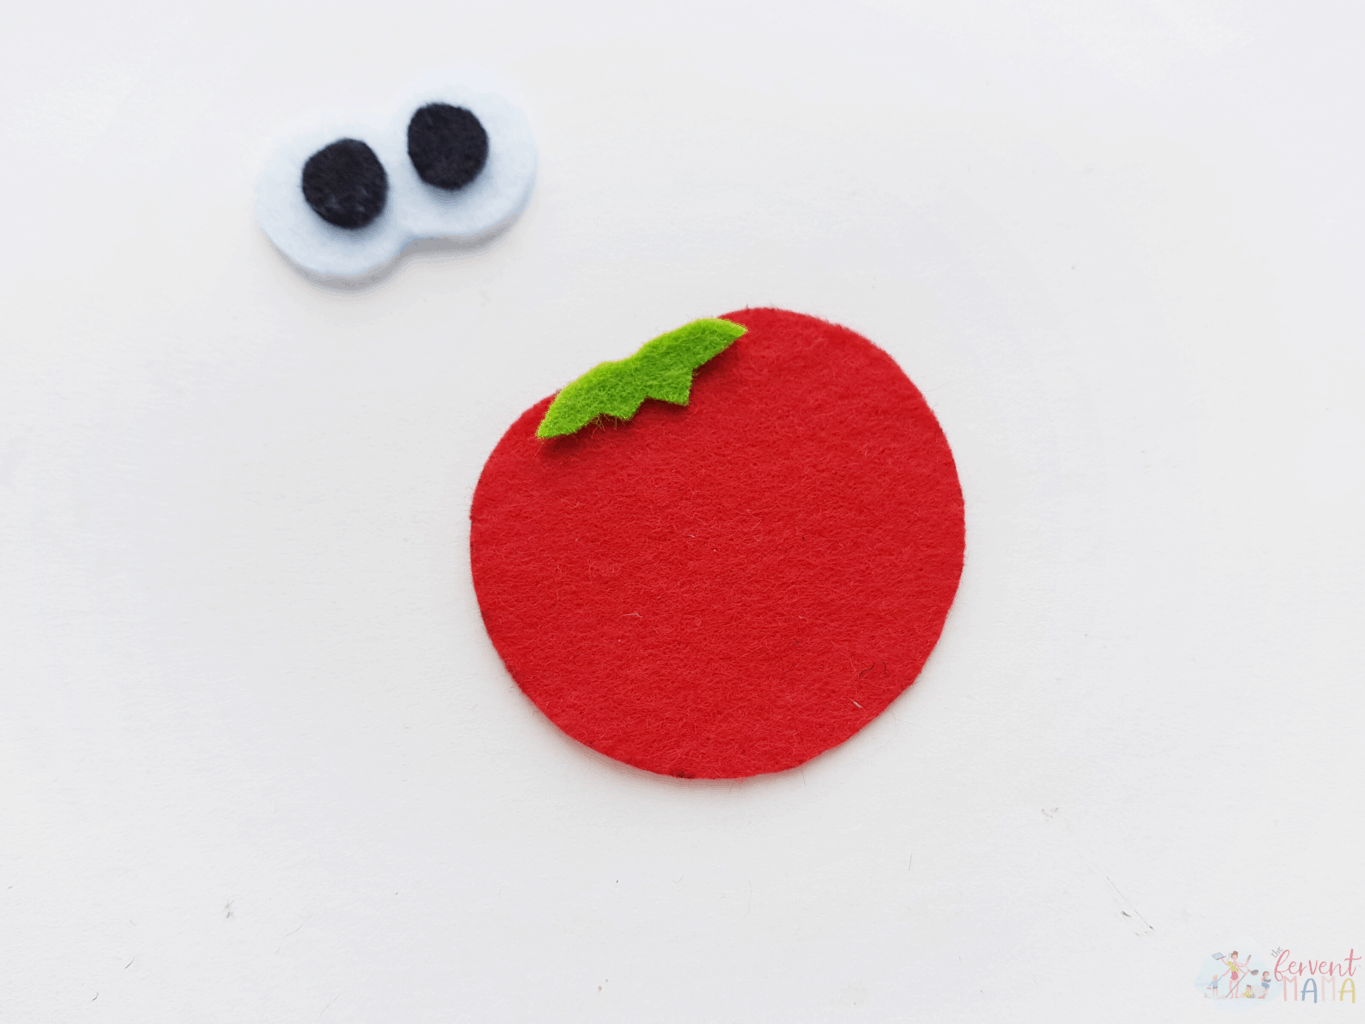 Bob the Tomato inspired felt pieces (red circle, white and black eyes, green stem)